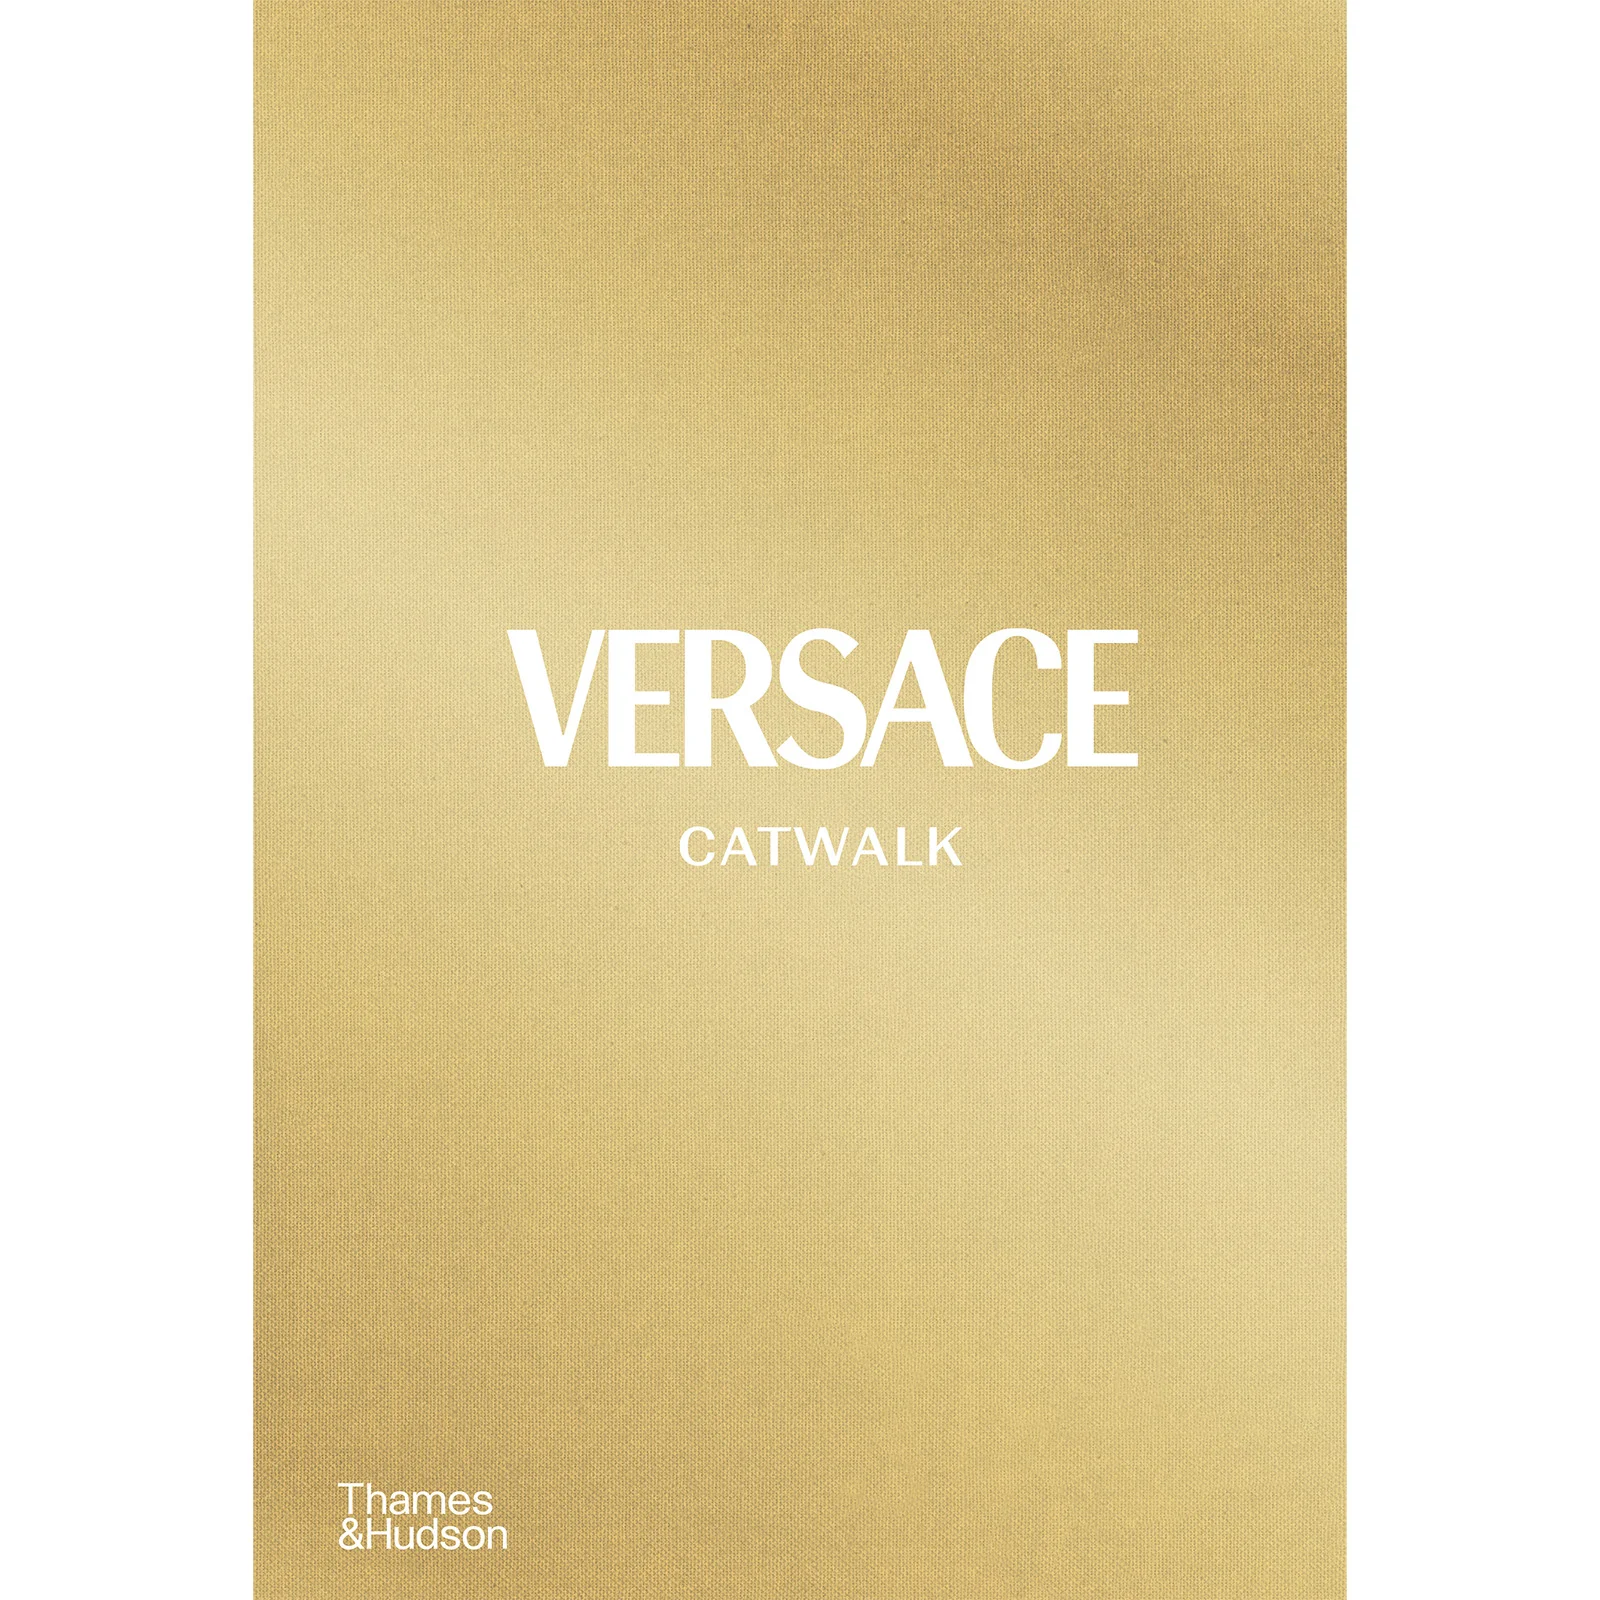 Thames and Hudson Ltd: Versace Catwalk - The Complete Collections Image 1